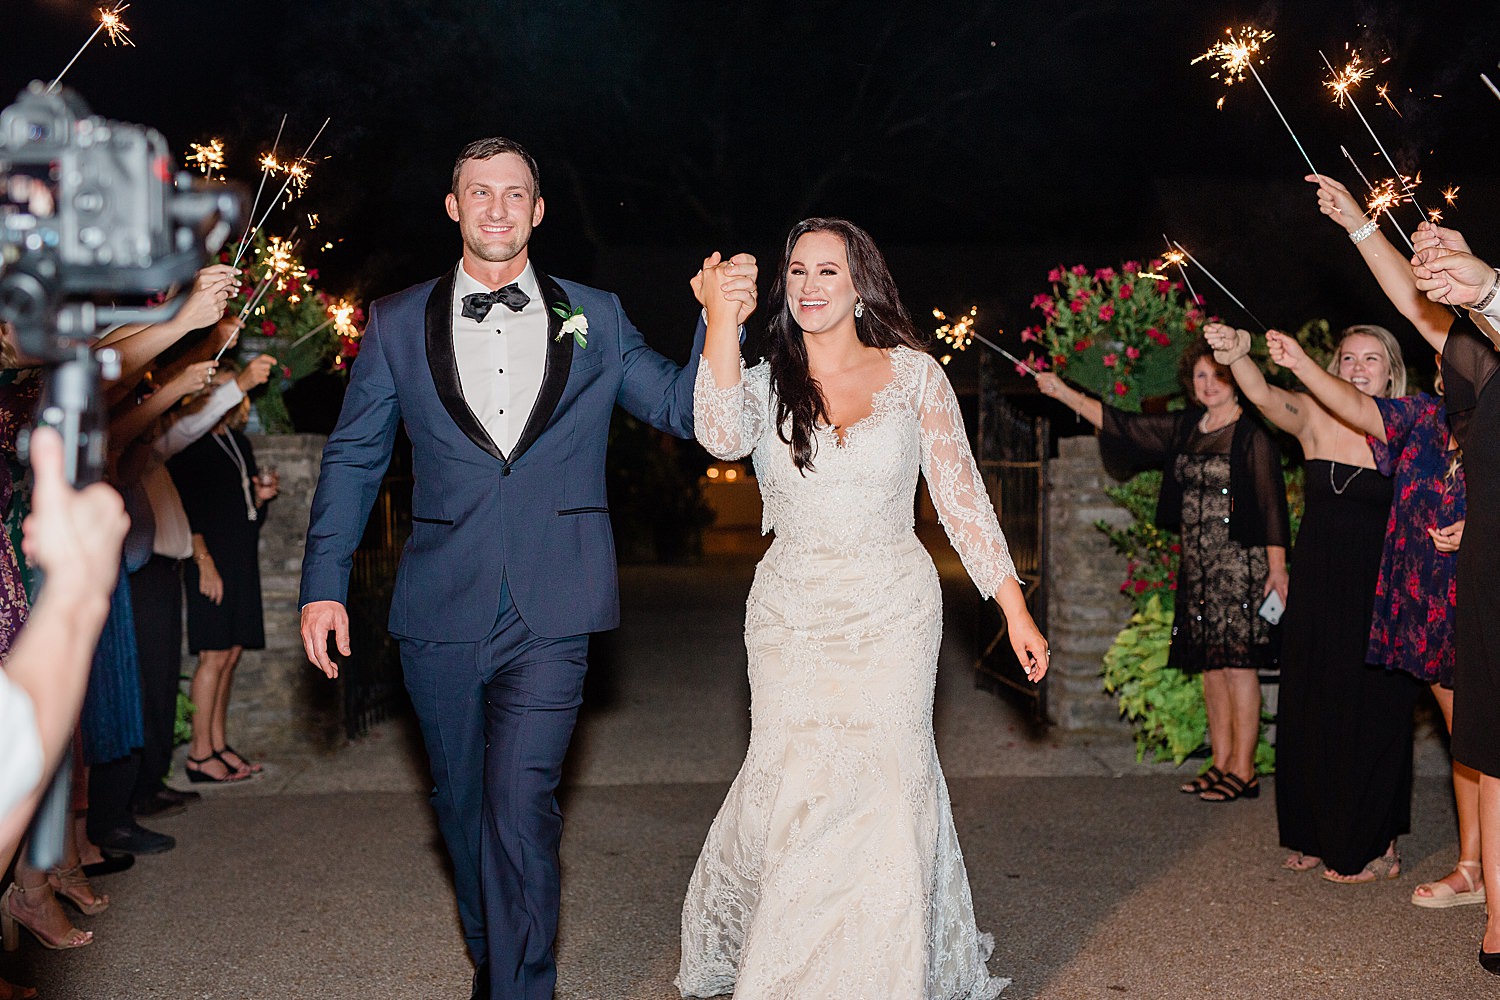 Bride and Groom smile holding hands as they exit their wedding surrounded by sparklers